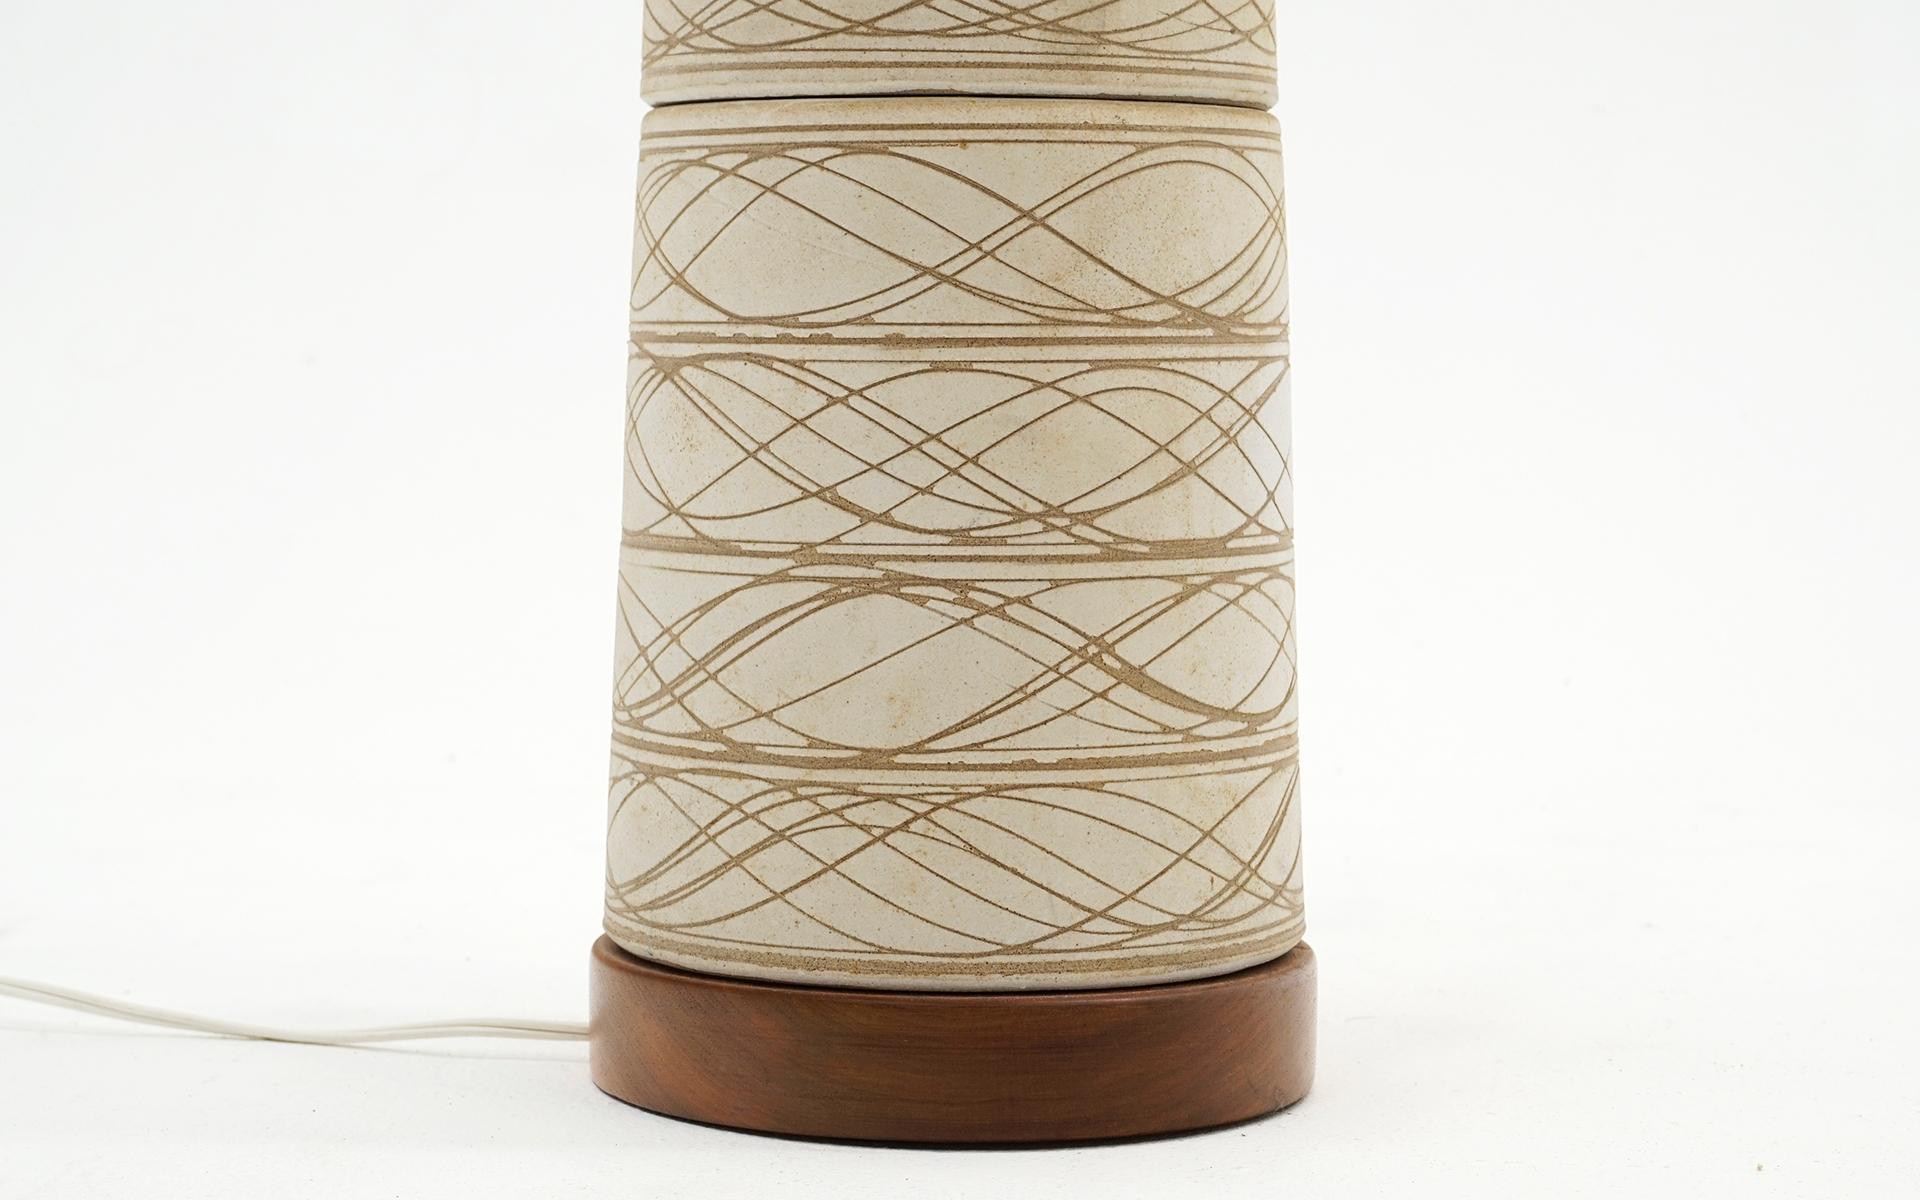 American Ceramic Table Lamp with Walnut Base and Finial by Martz for Marshall Studios